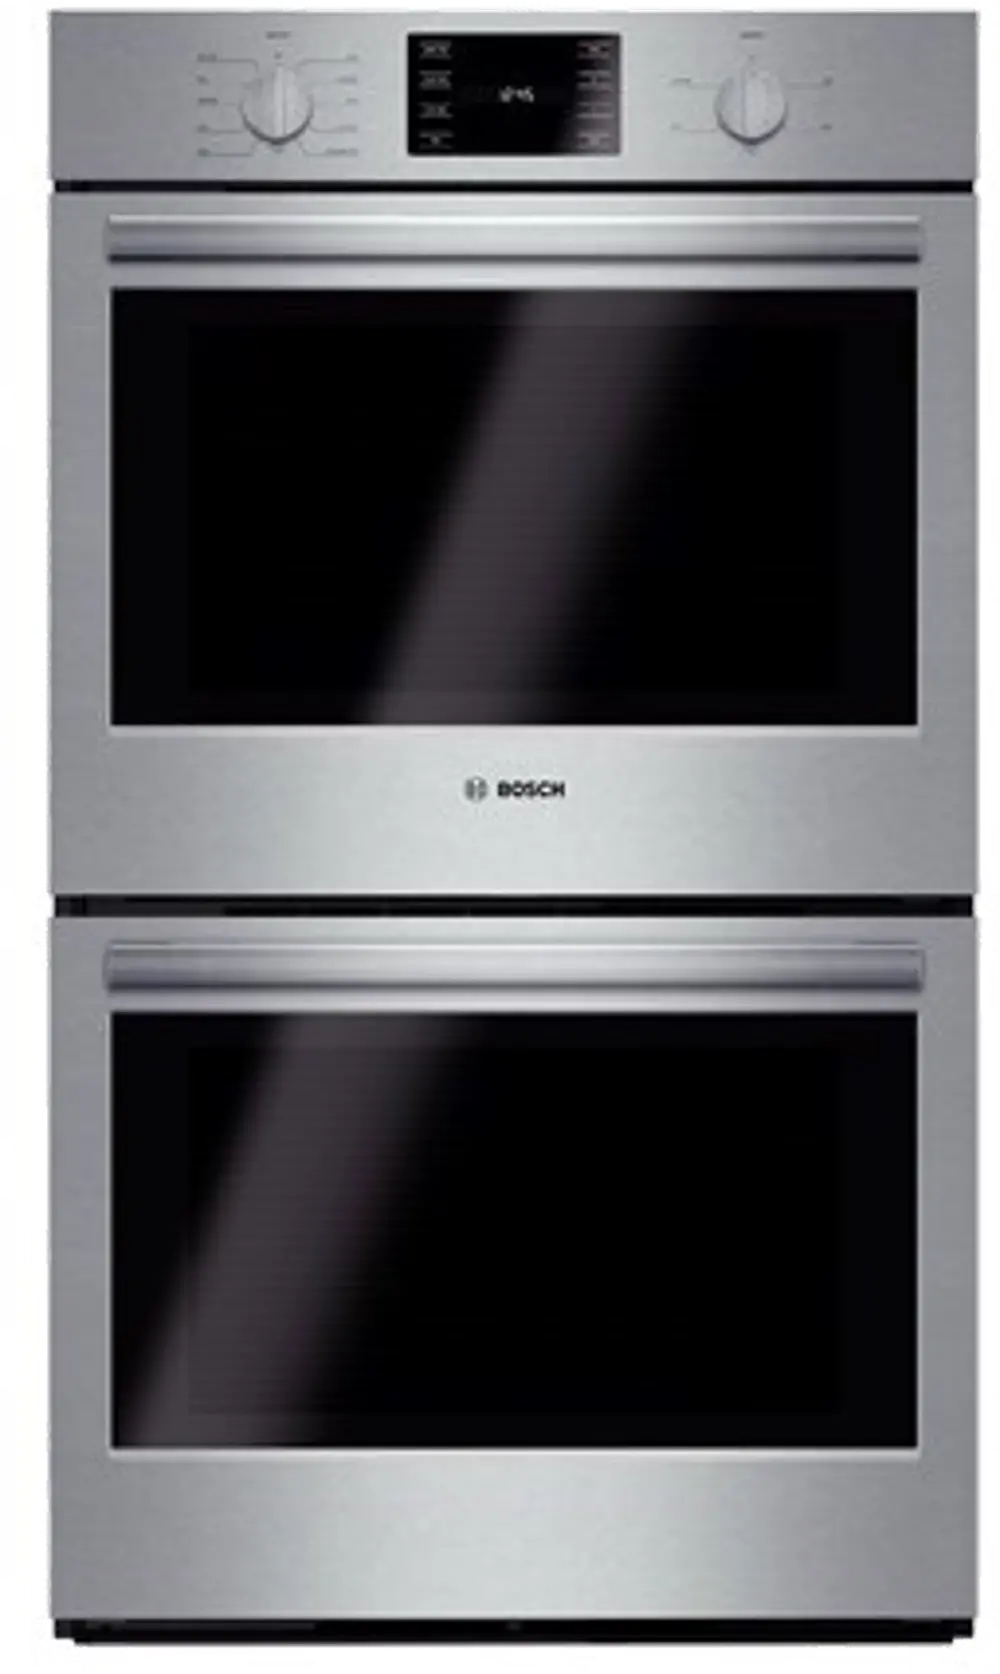 HBL5651UC Bosch 9.2 cu ft Double Wall Oven - Stainless Steel 30 Inch-1